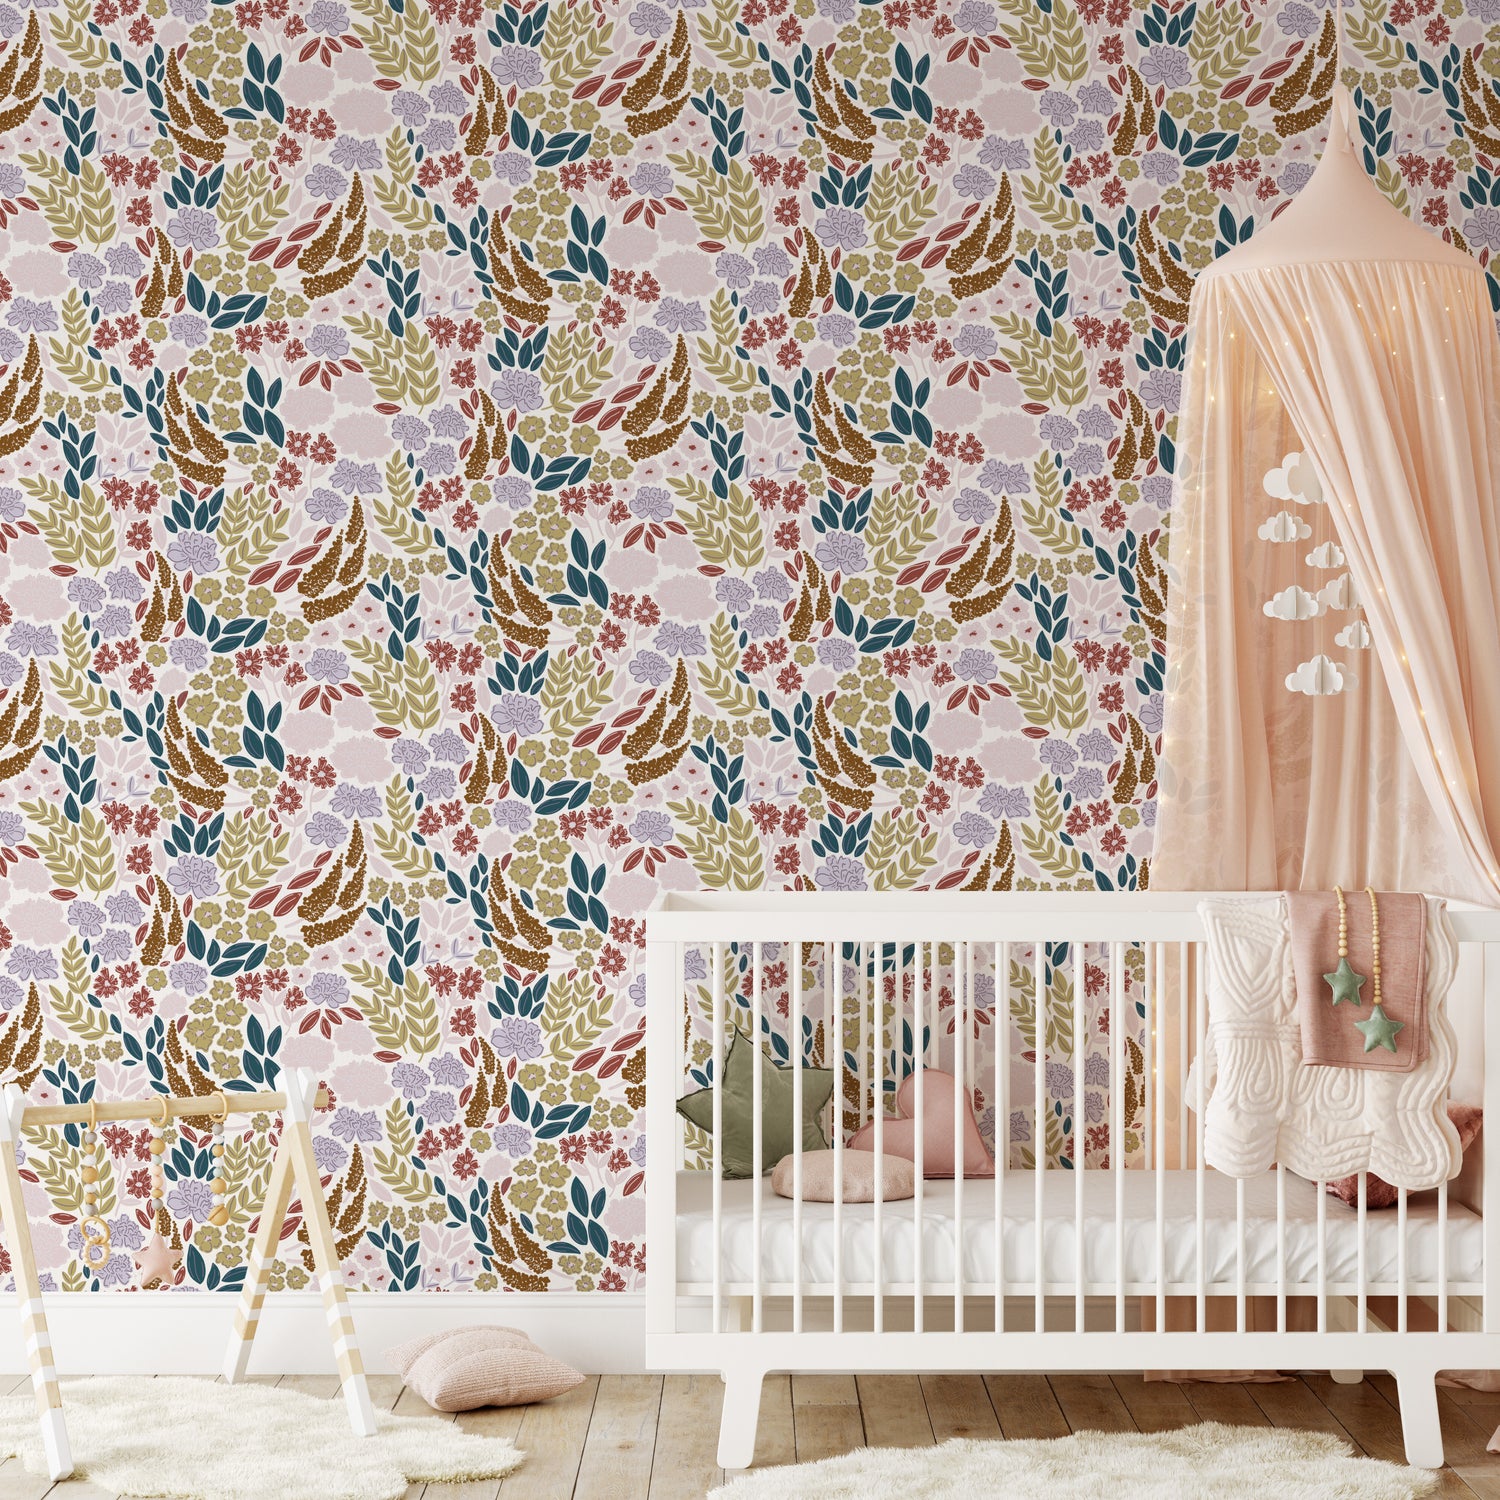 Add natural beauty to your home with Wildflower Waltz Wallpaper - Fall Berry. The stunning array of botanical and wildflowers creates a peaceful and welcoming atmosphere shown in a full size image.